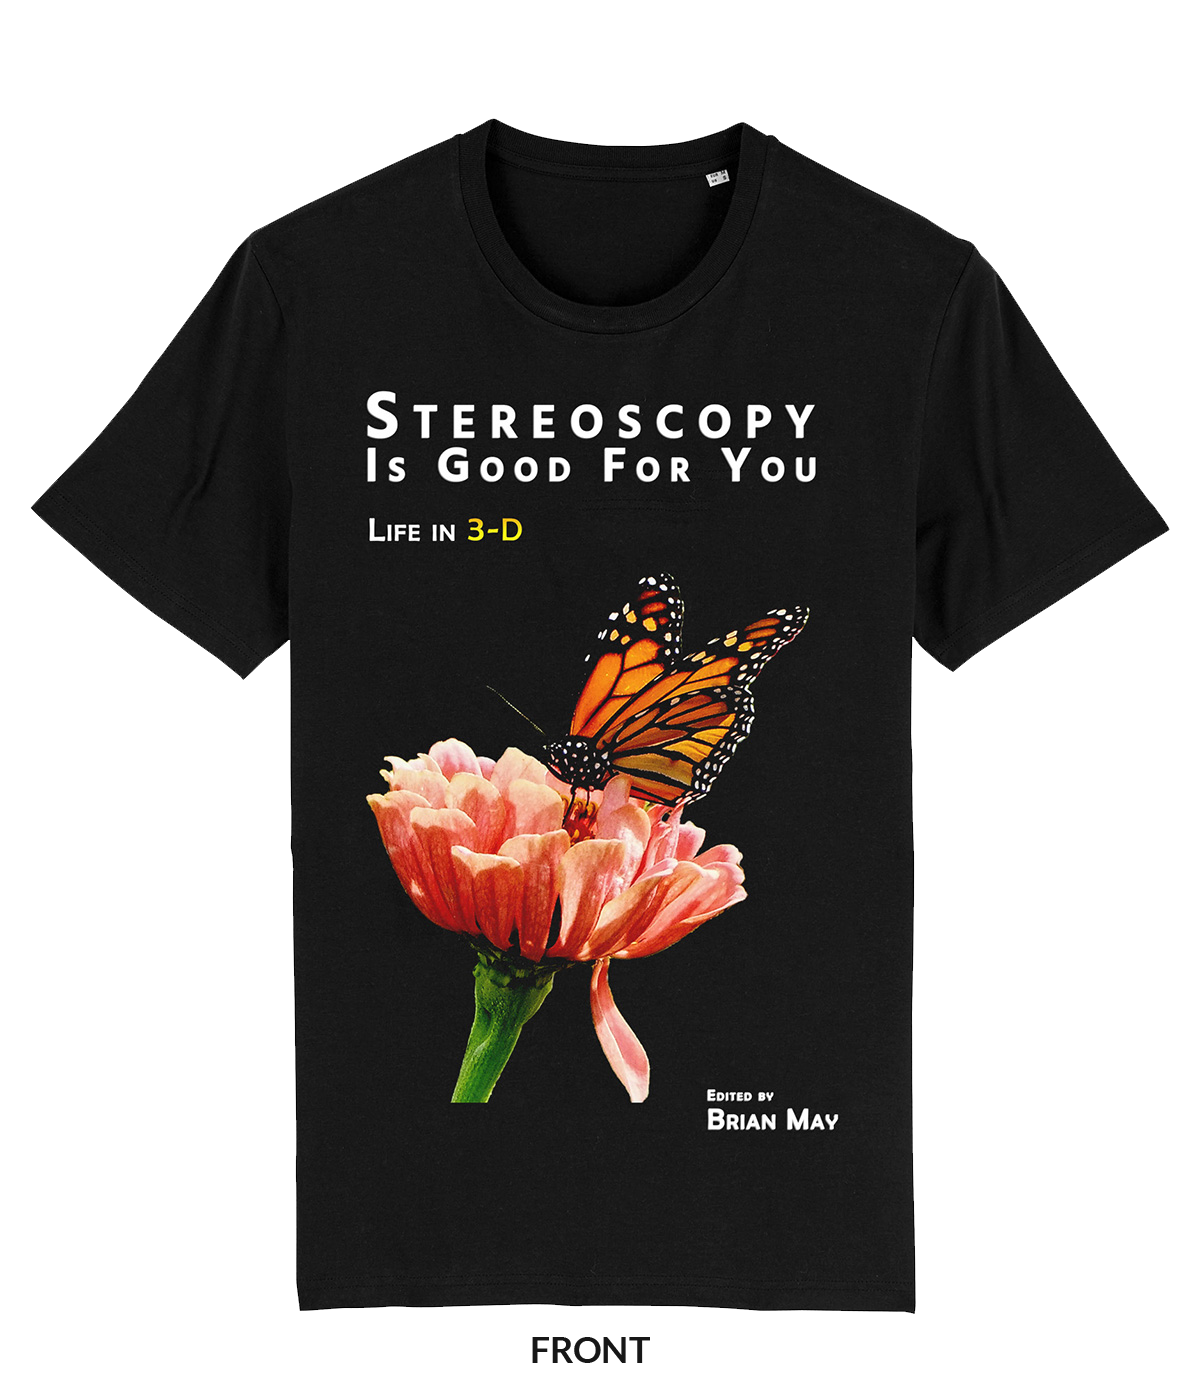 Stereoscopy Is Good For You: Life in 3-D T-Shirt [LARGE]